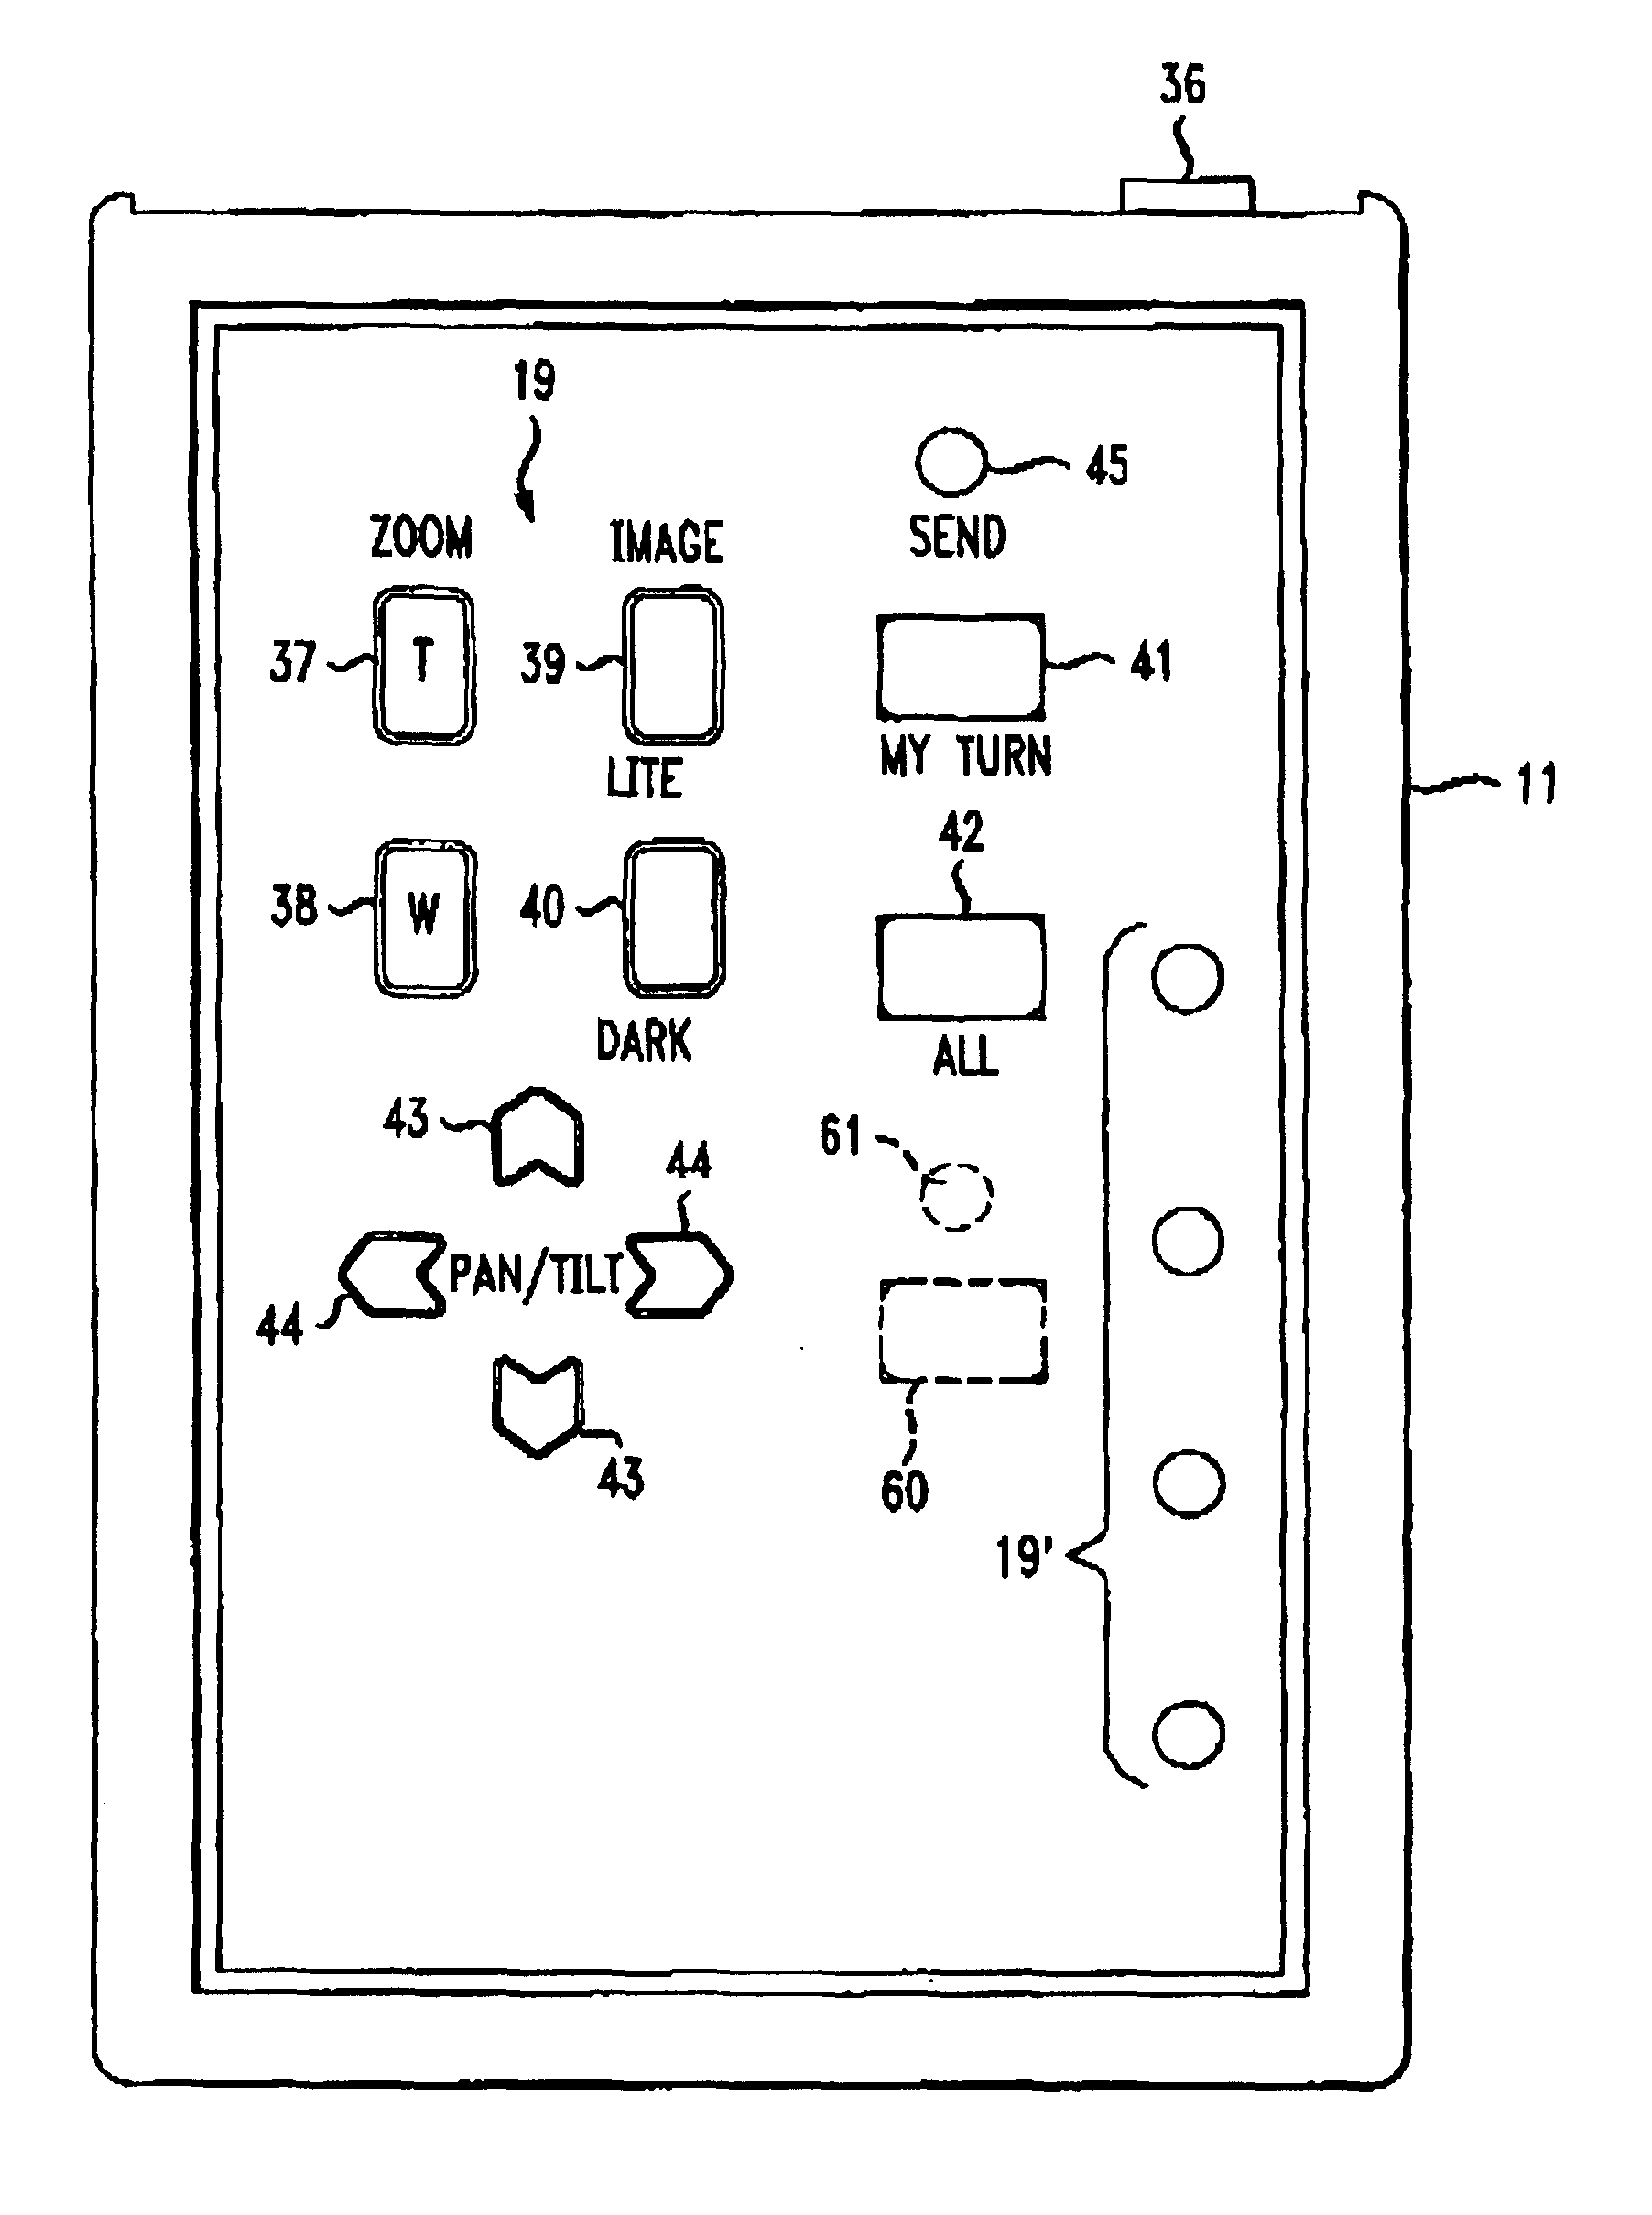 Multi-user camera control system and method